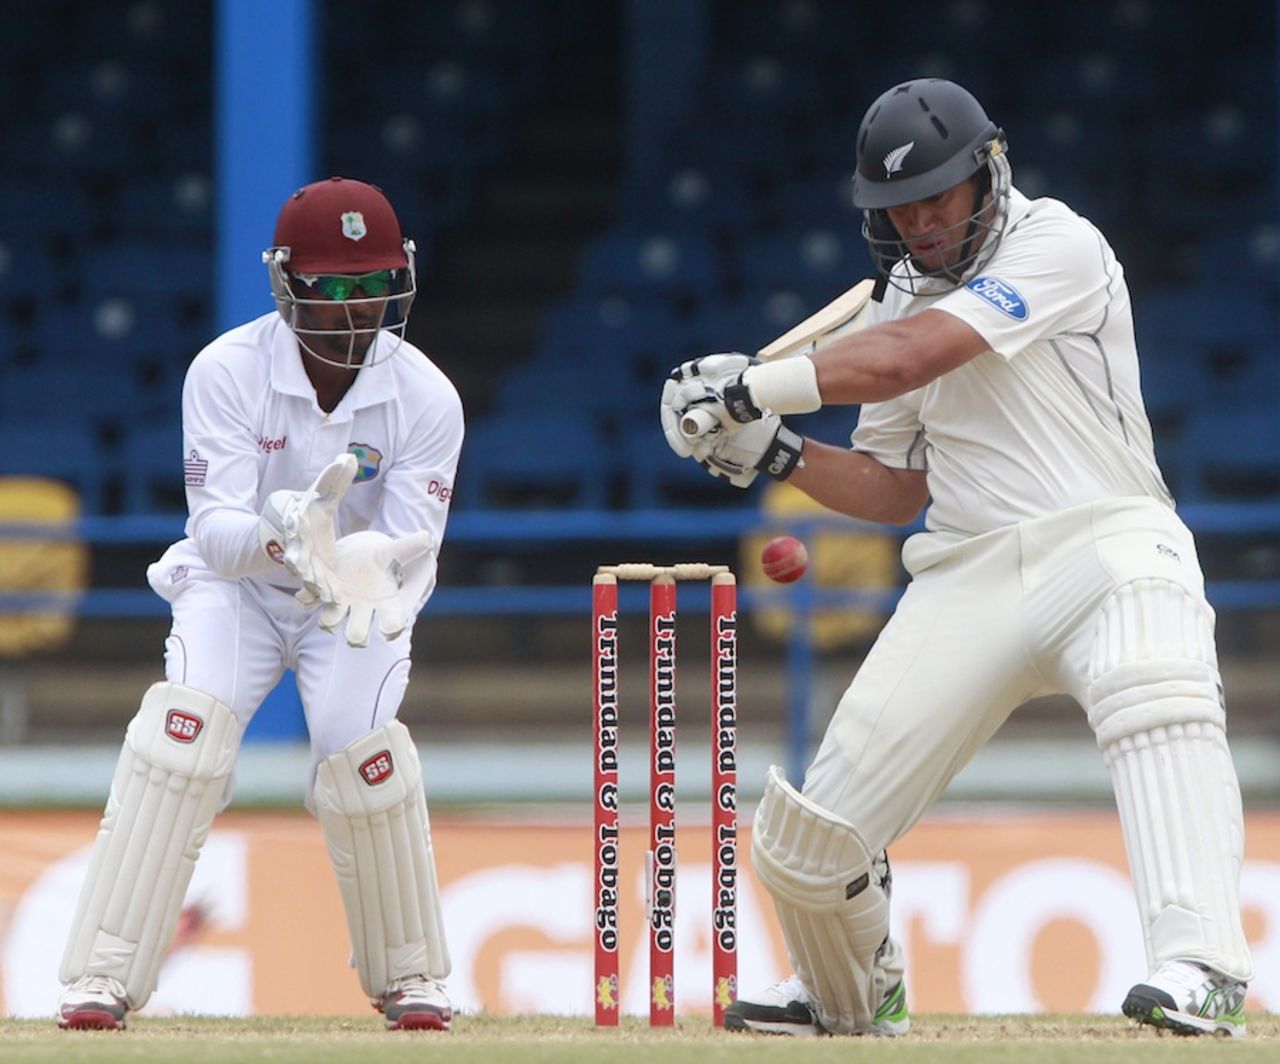 Ross Taylor goes back to cut, West Indies v New Zealand, 2nd Test, Trinidad, 4th day, June 19, 2014